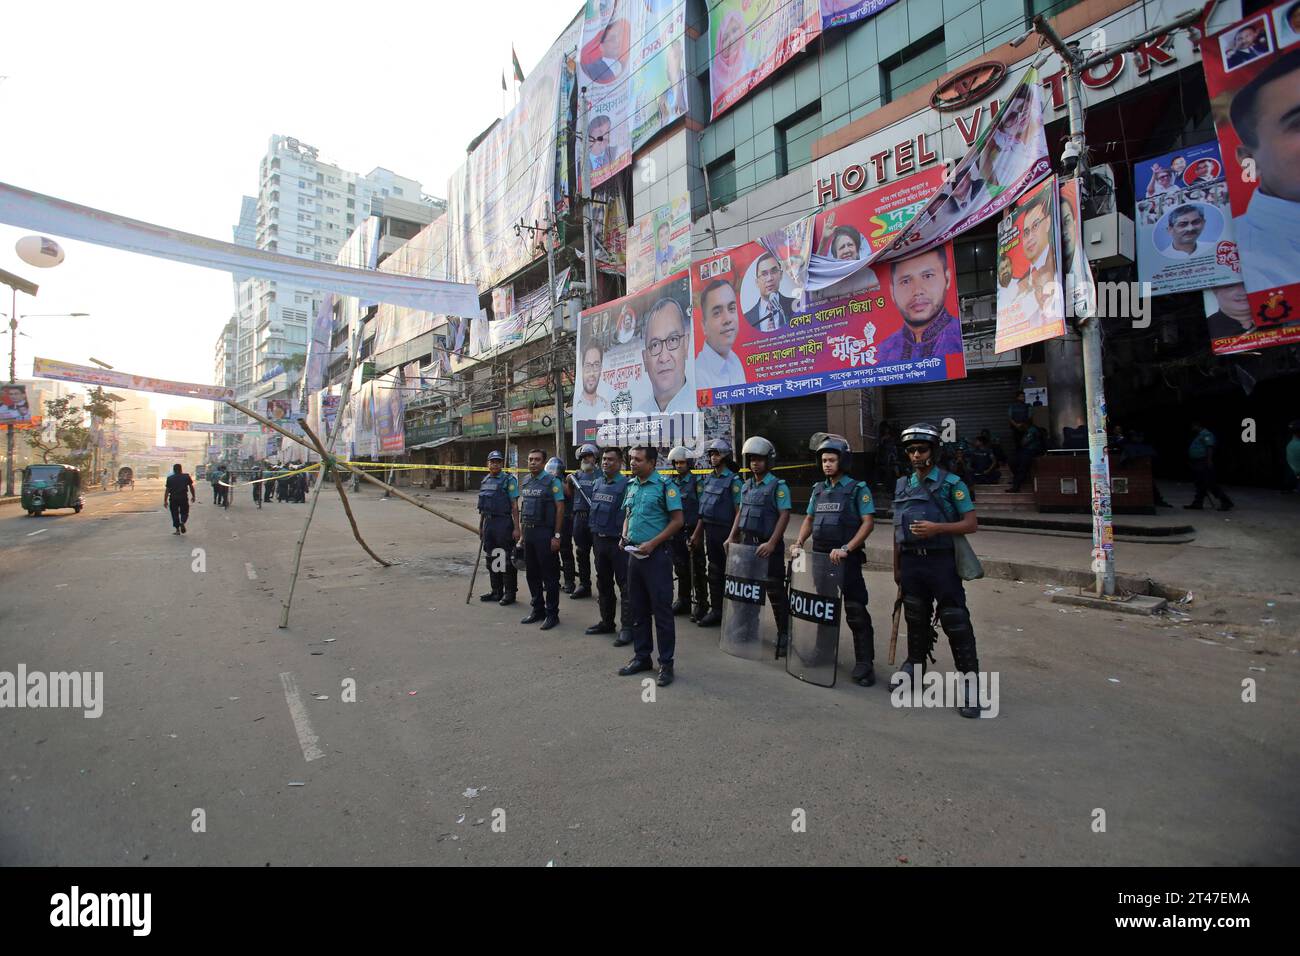 Bangladesh's Criminal Investigation Department (CID) unit gather along a street as they inspect a protest site after Bangladesh Nationalist party (BNP) activists held a rally amid the ongoing nationwide strike in Dhaka on October 29, 2023. More than 100,000 supporters of two major Bangladesh opposition parties rallied on October 28, to demand Prime Minister Sheikh Hasina step down to allow a free and fair vote under a neutral government. Both BNP and Jamaat-e-Islami called for a nationwide strike on October 29, 2023, to protest the violence. Photo by Habibur Rahman/ABACAPRESS.COM Stock Photo